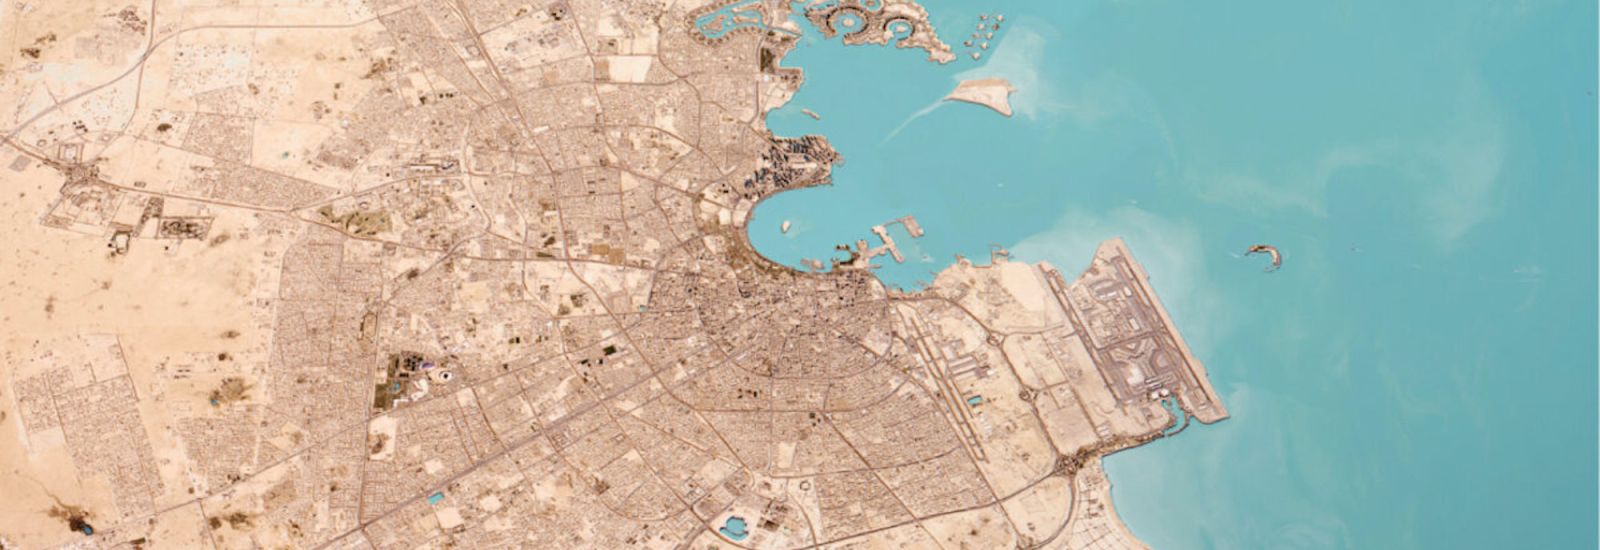 Aerial view of Doha, showing roadways and port